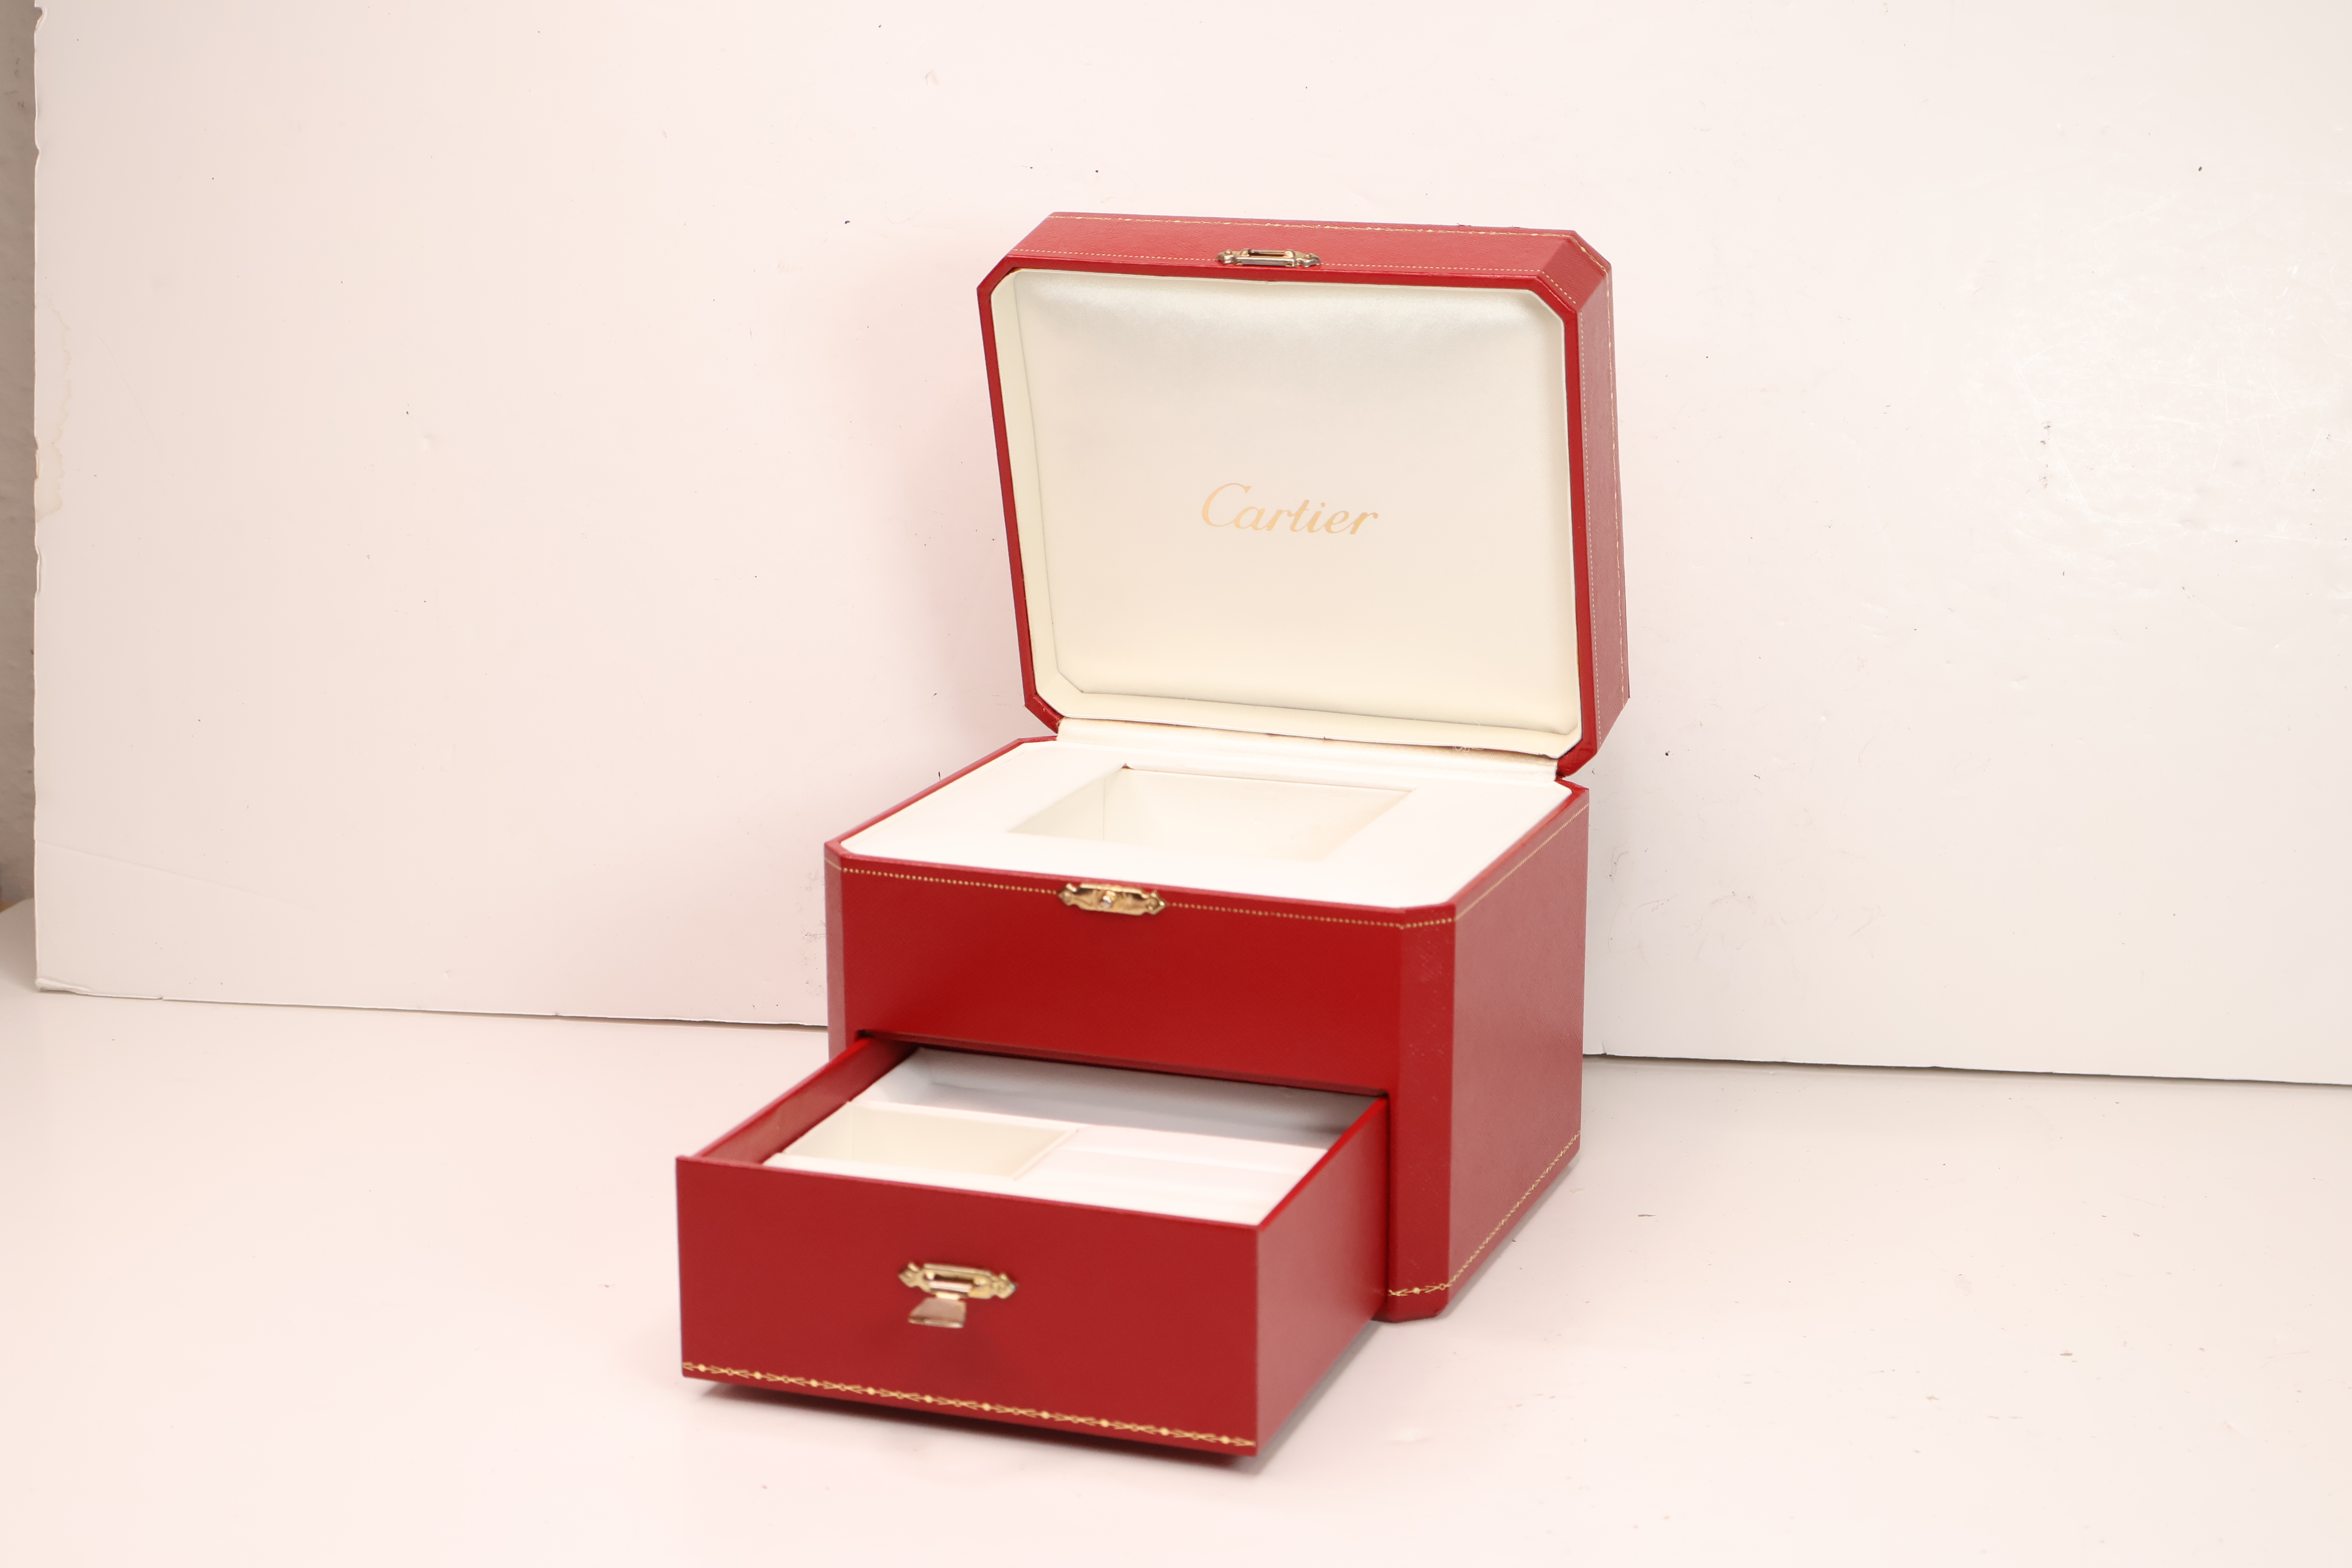 *To Be Sold Without Reserve* Cartier Watch Box, with draw, missing cushion, clasp A/F - Image 3 of 4